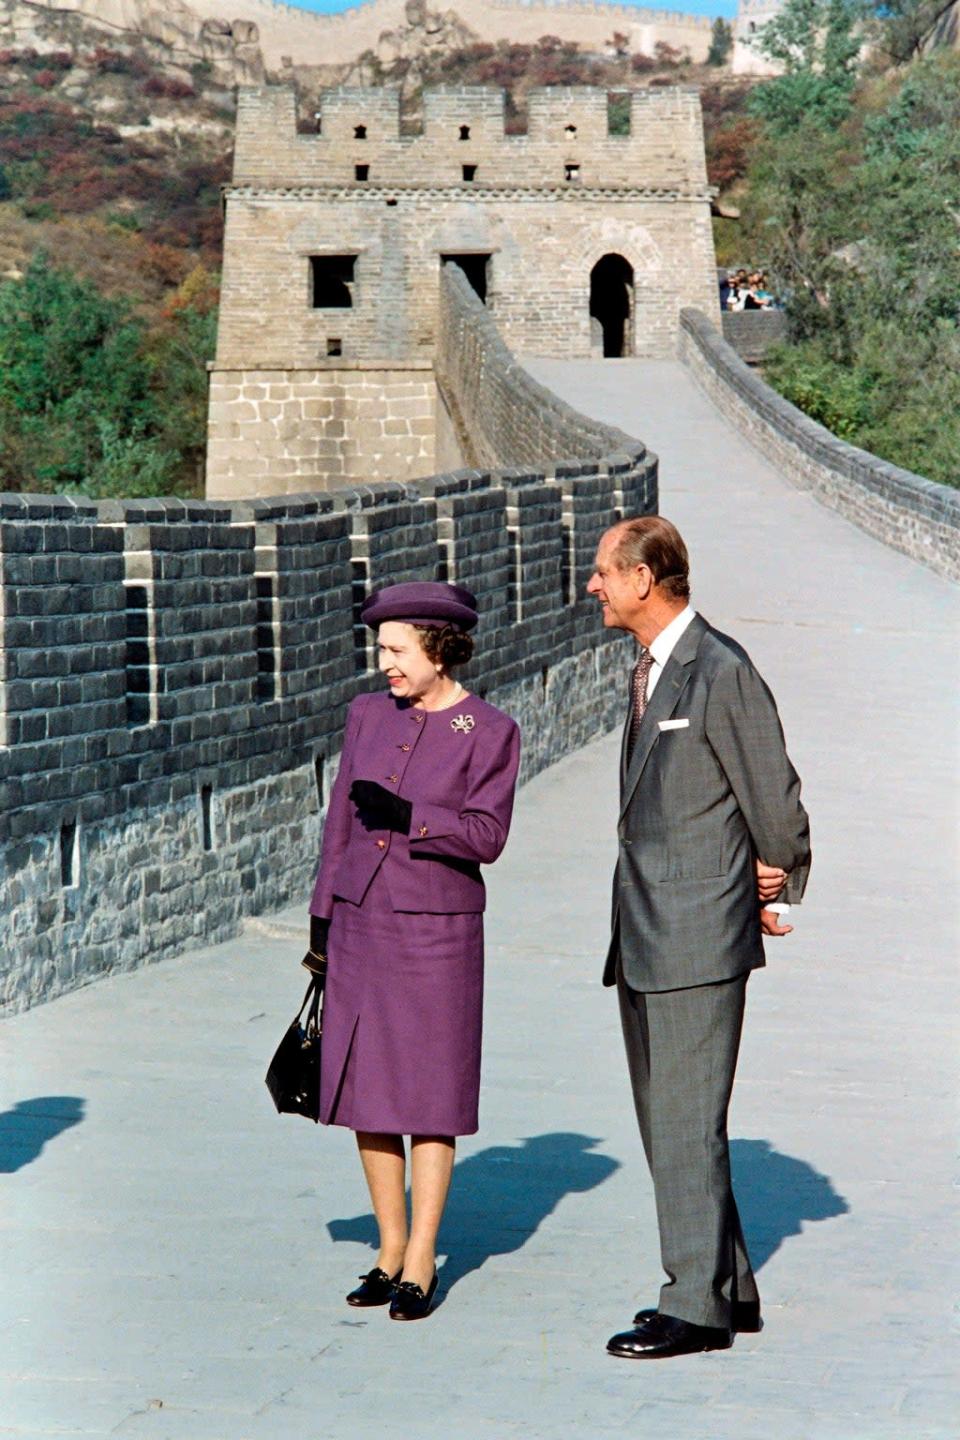 Queen Elizabeth II and Prince Philip, Duke of Edinburgh visit the Great Wall of China on October 1986 (AFP via Getty Images)